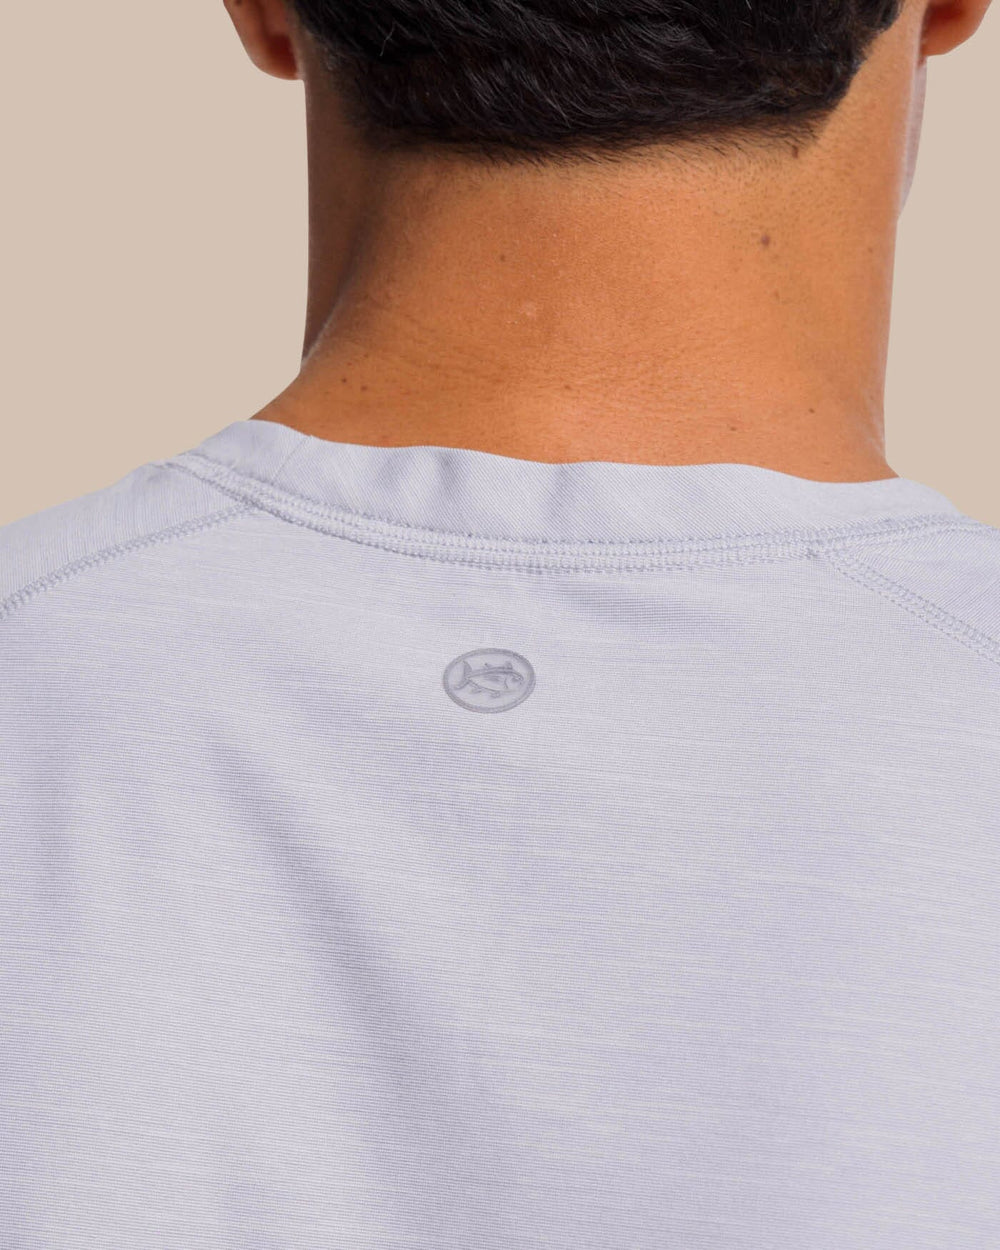 The yoke view of the Southern Tide brrr°®-illiant Performance Tee by Southern Tide - Platinum Grey